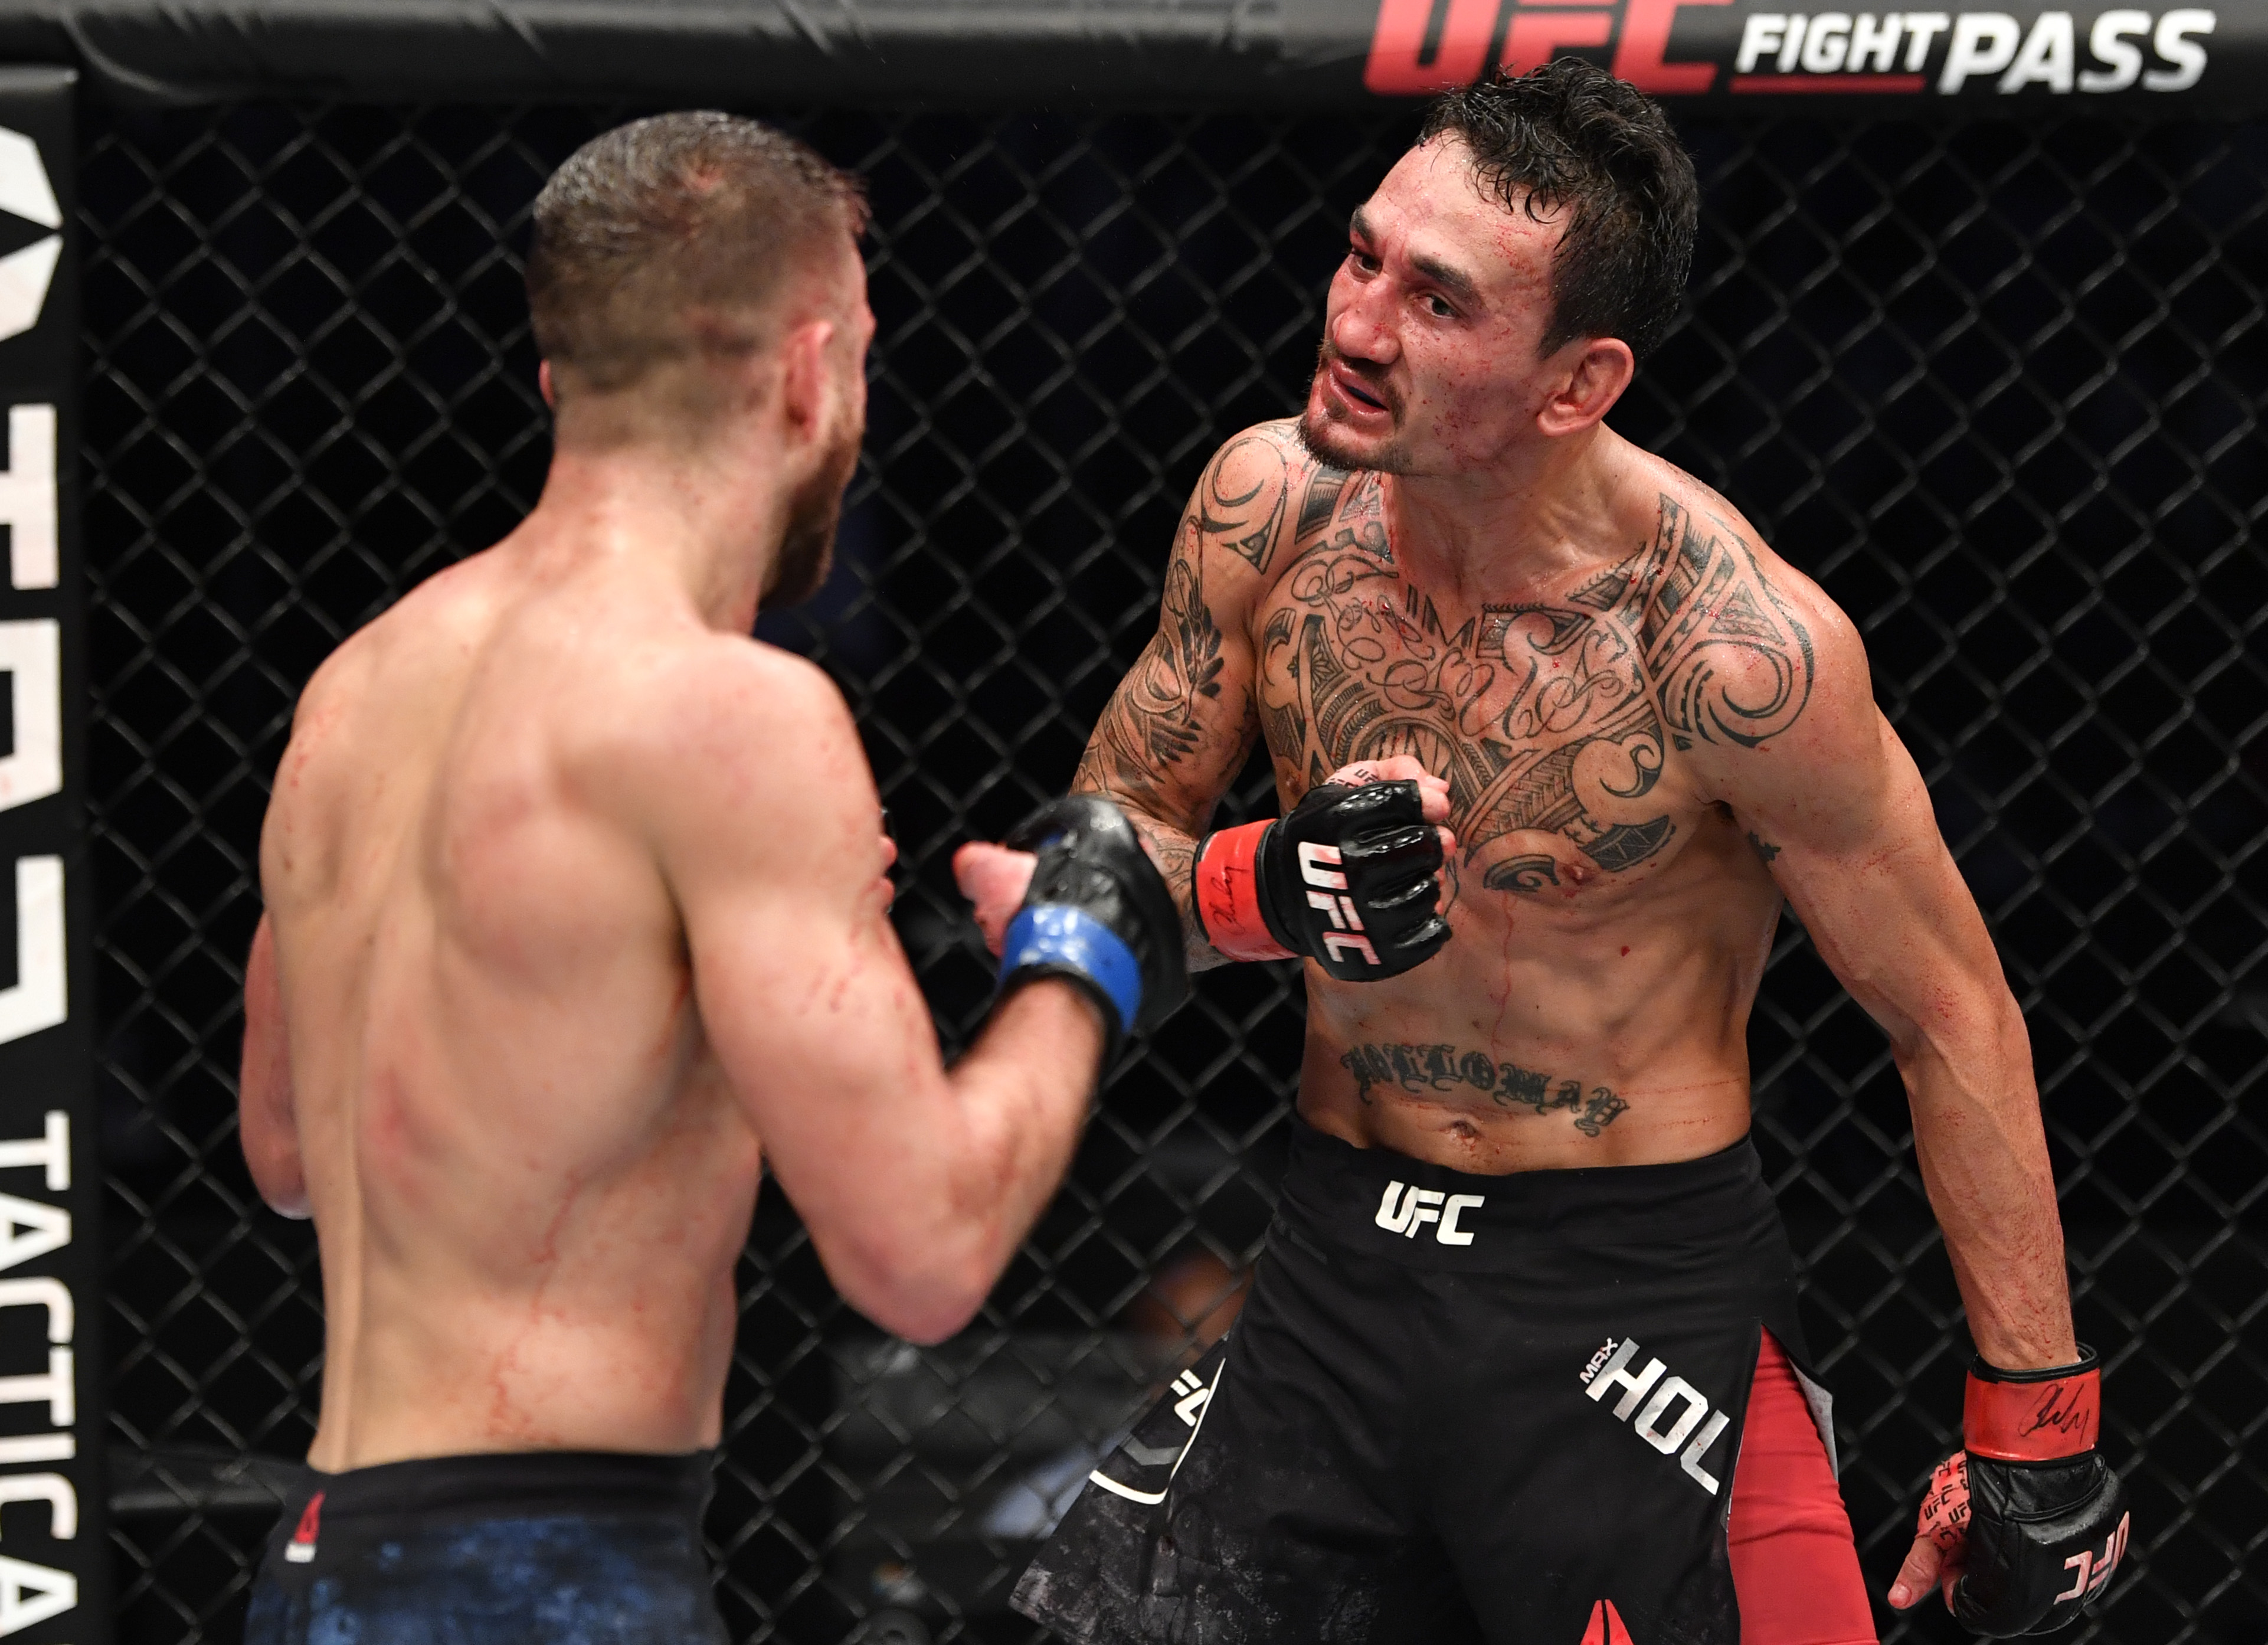 Max Holloway is massively favored over Yair Rodriguez in the UFC Vegas 42 main event